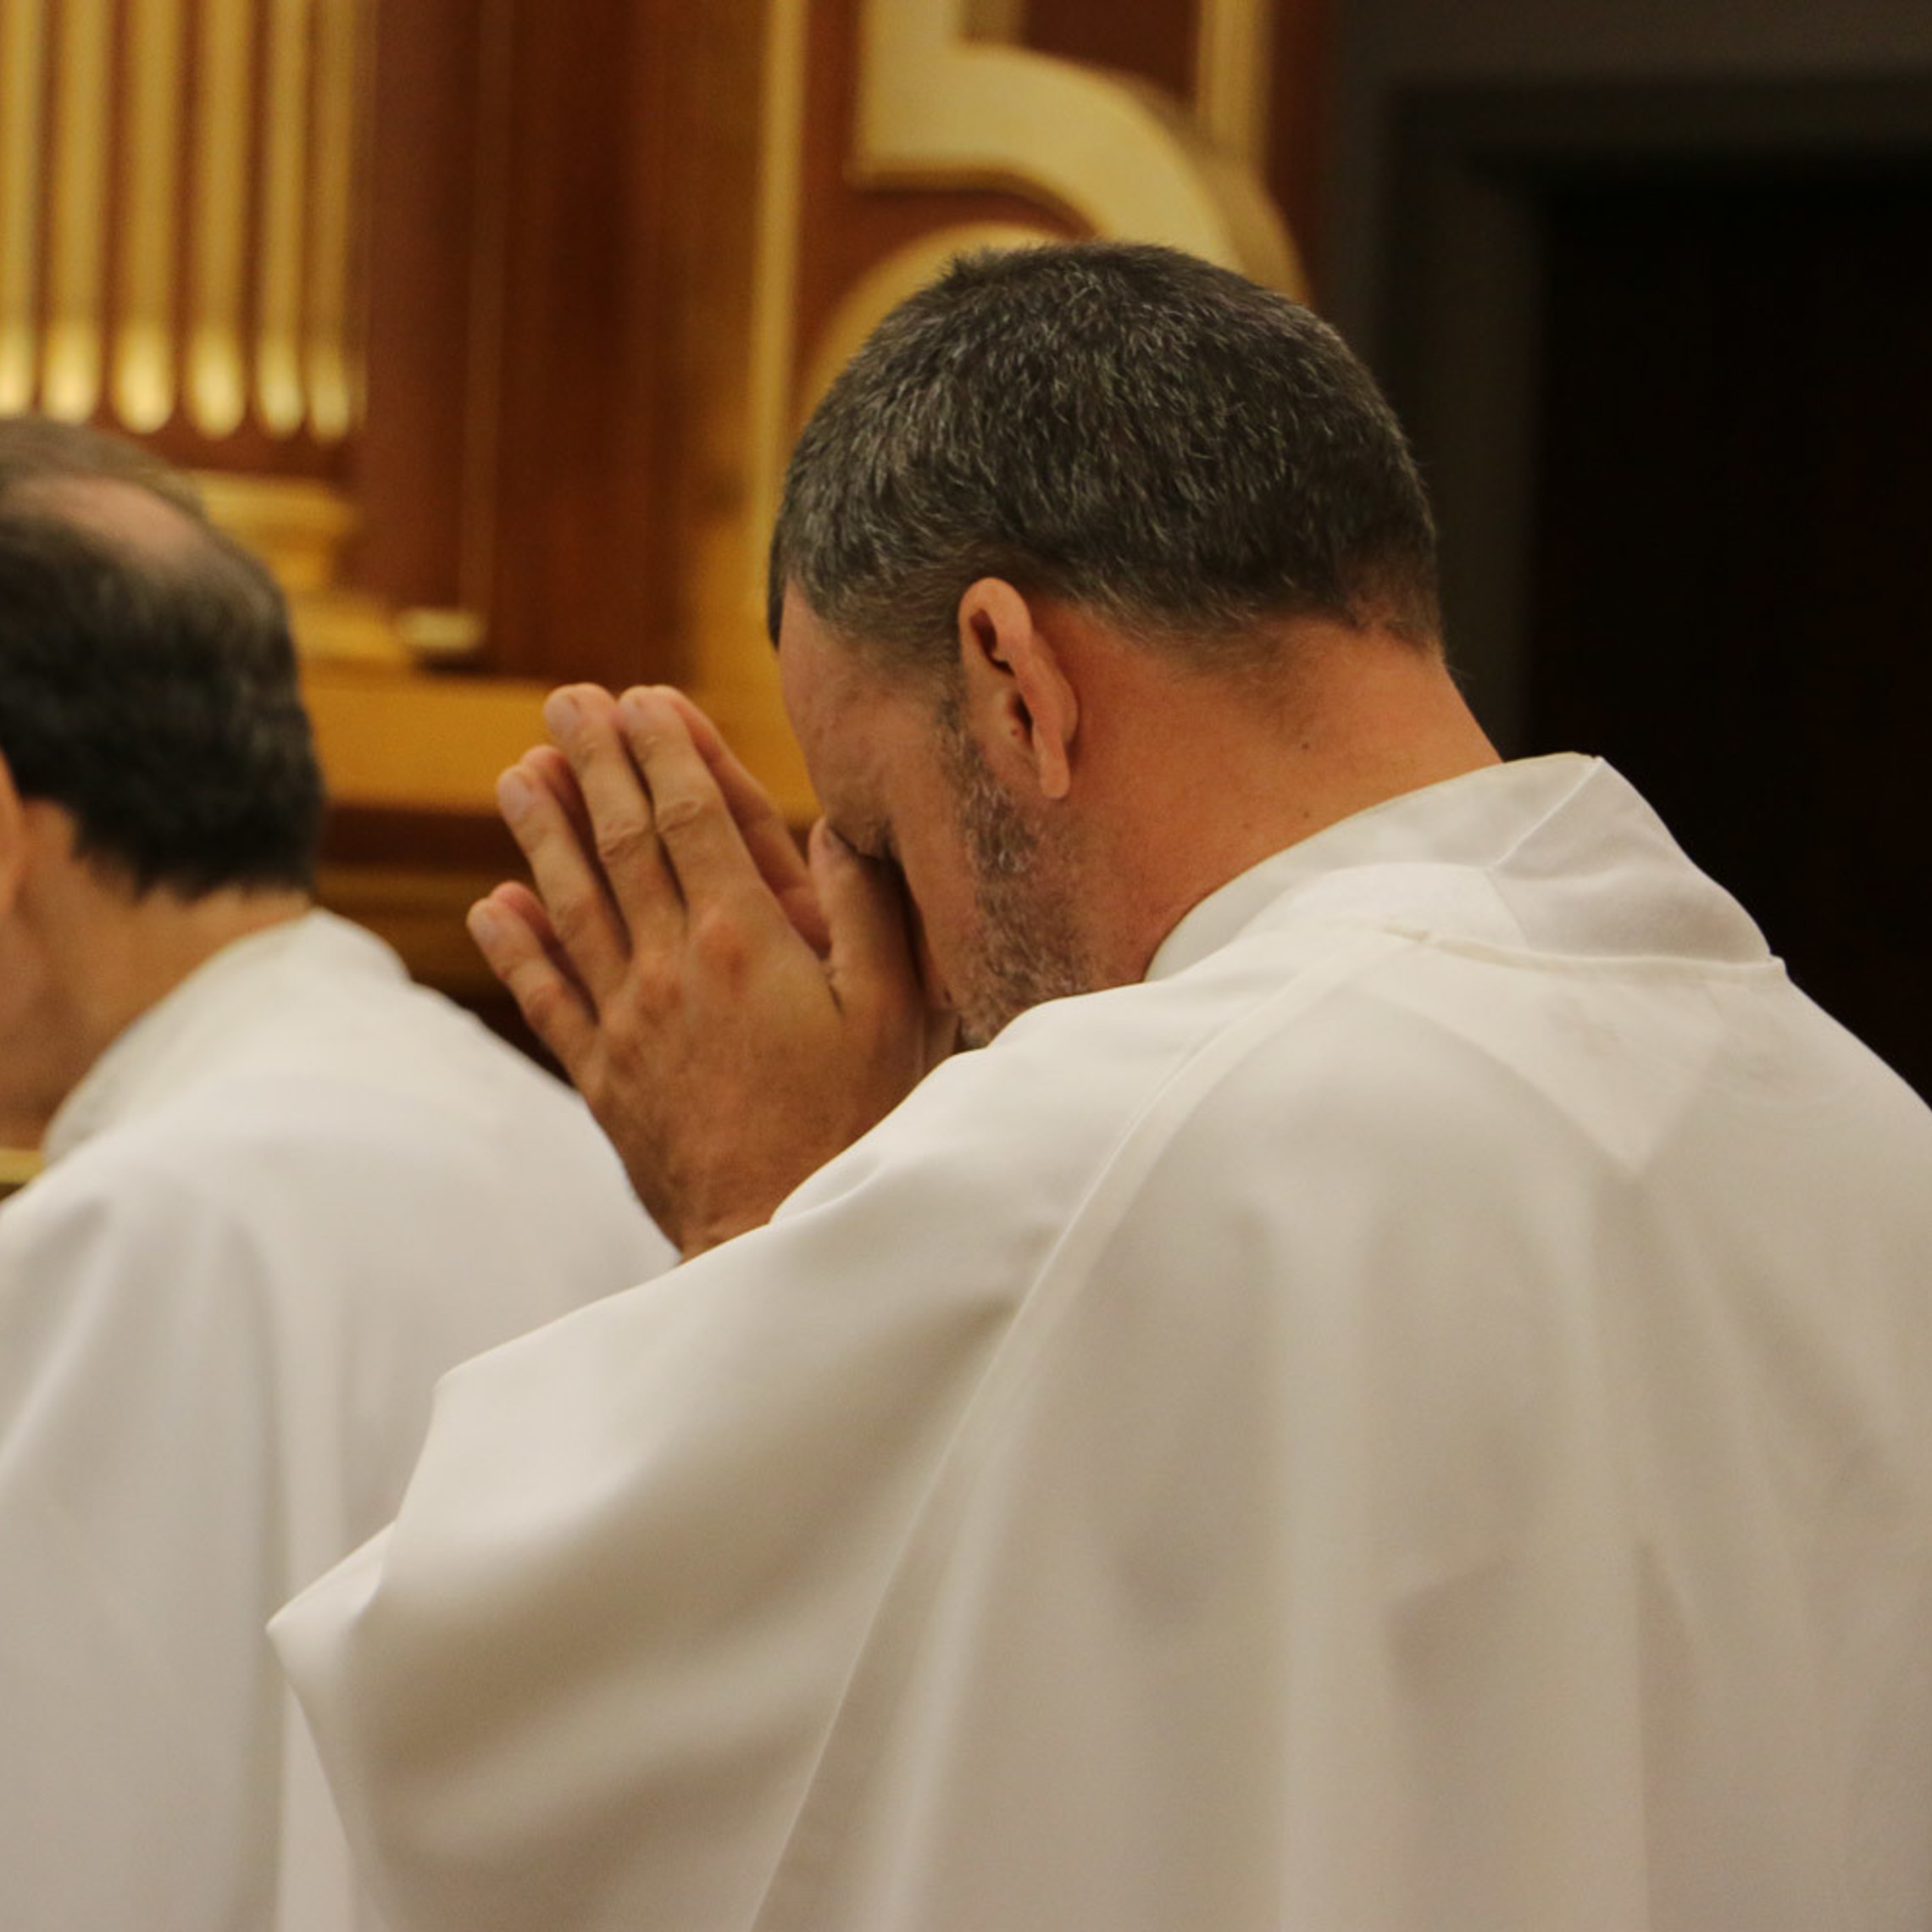 Meet Our Priests & Brothers  Society of Our Lady of the Most Holy Trinity